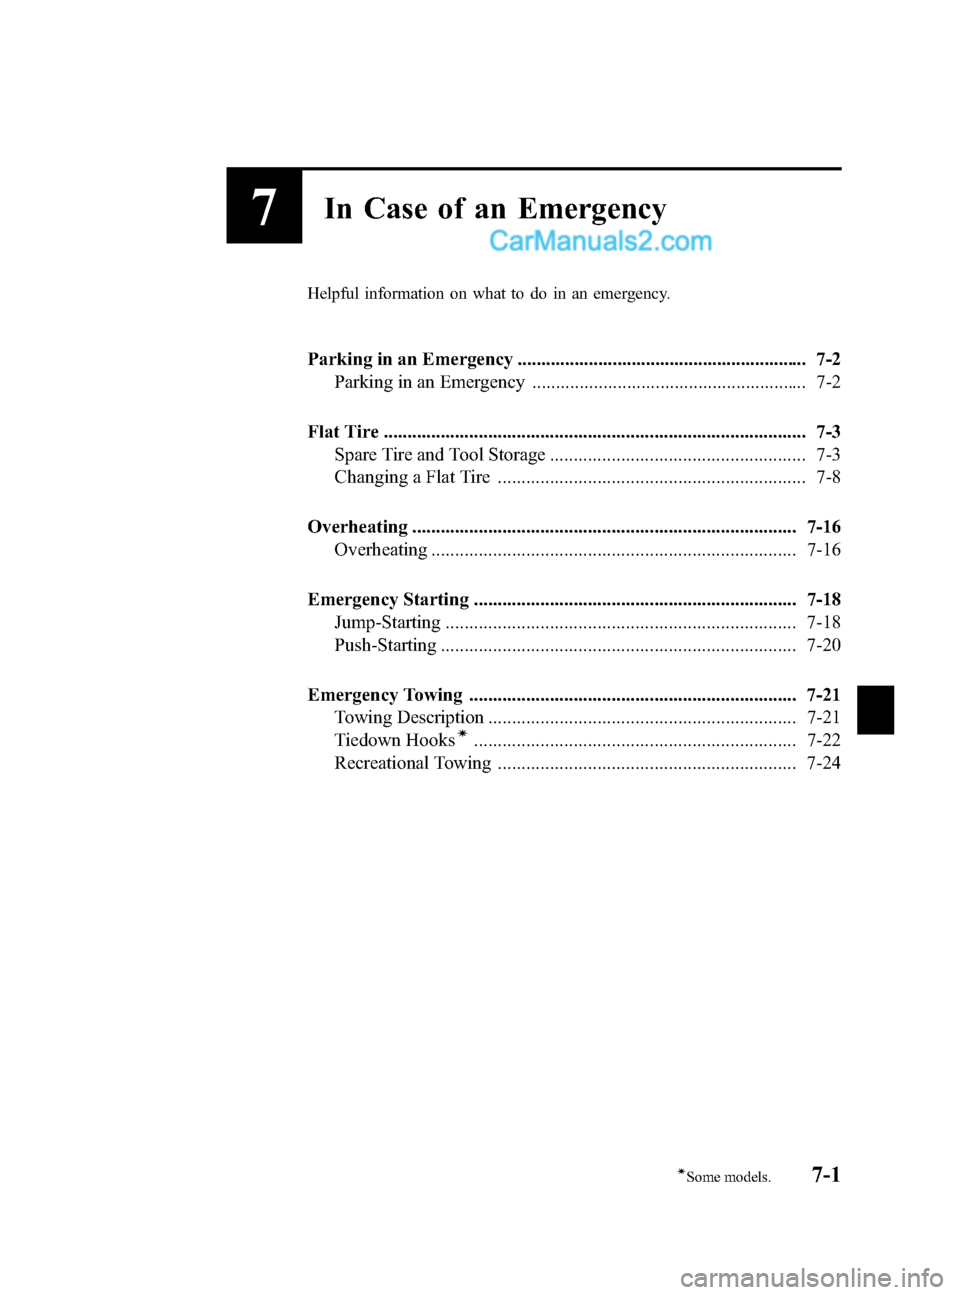 MAZDA MODEL CX-9 2015  Owners Manual (in English) Black plate (453,1)
7In Case of an Emergency
Helpful information on what to do in an emergency.
Parking in an Emergency ............................................................. 7-2Parking in an E